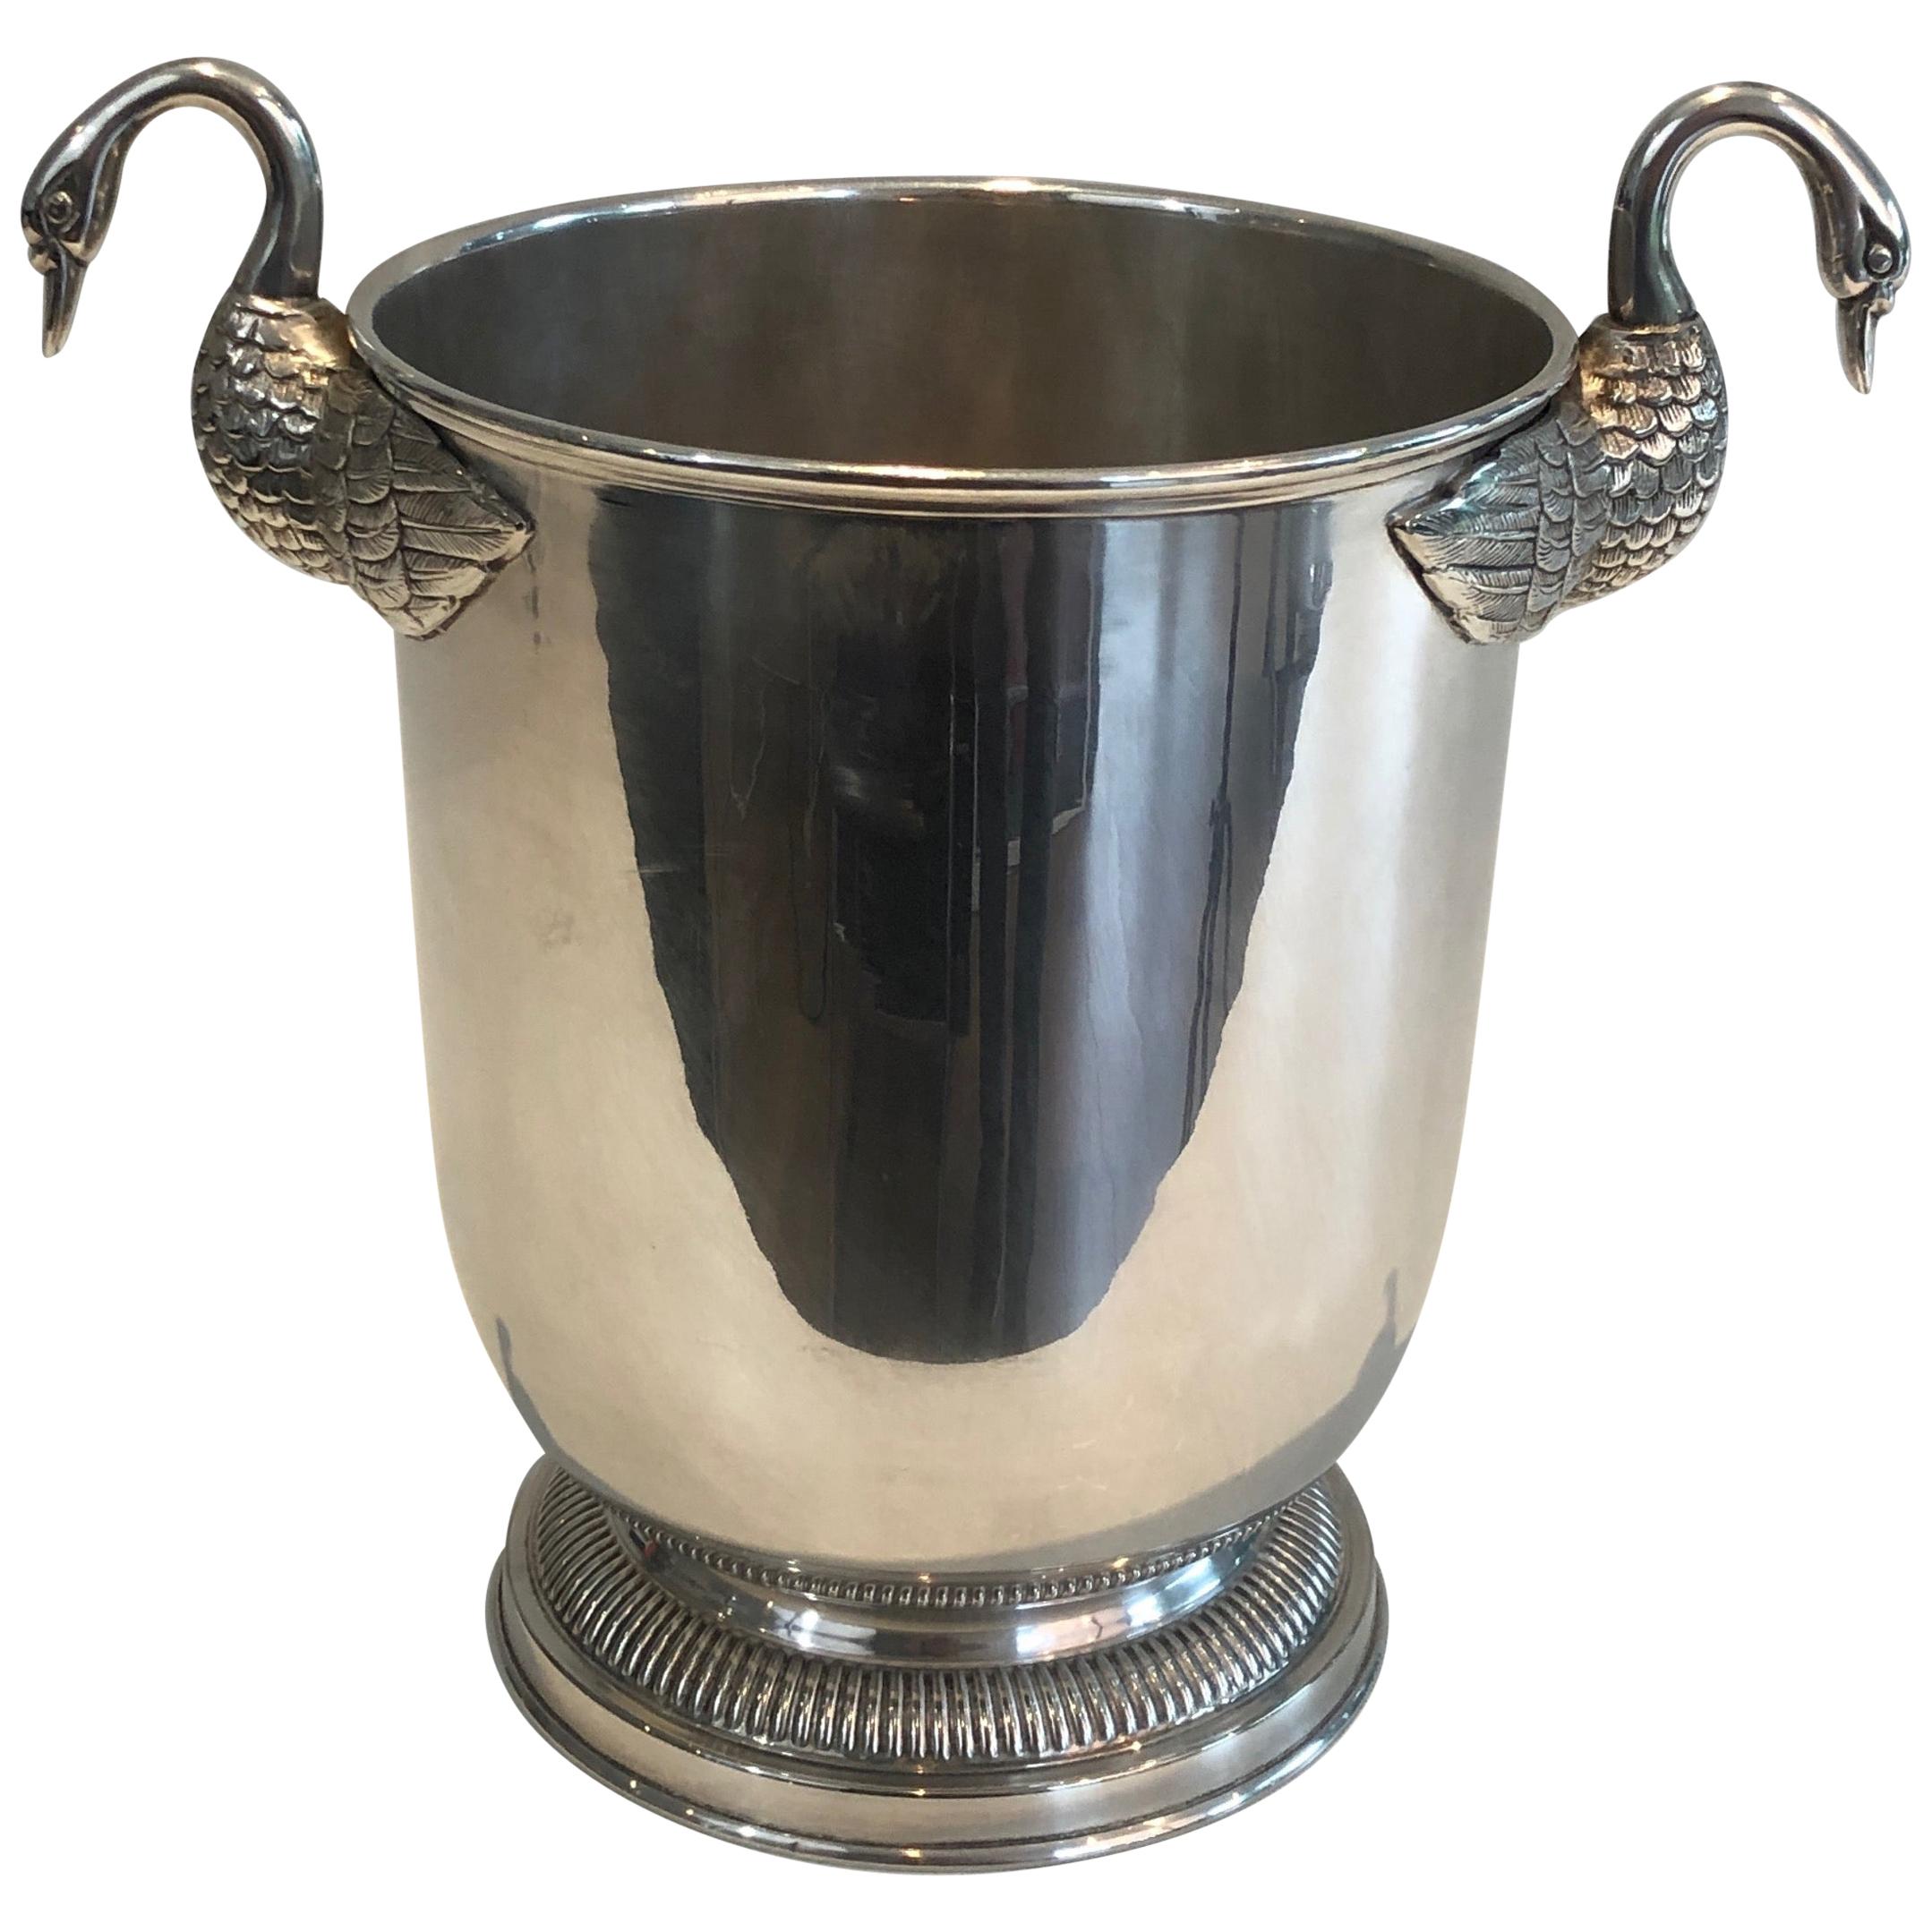 This very nice neoclassical ice bucket is made of silver plated. It has fine swan handles. This is a very nice French piece attributed to Christofle. Circa 1940.